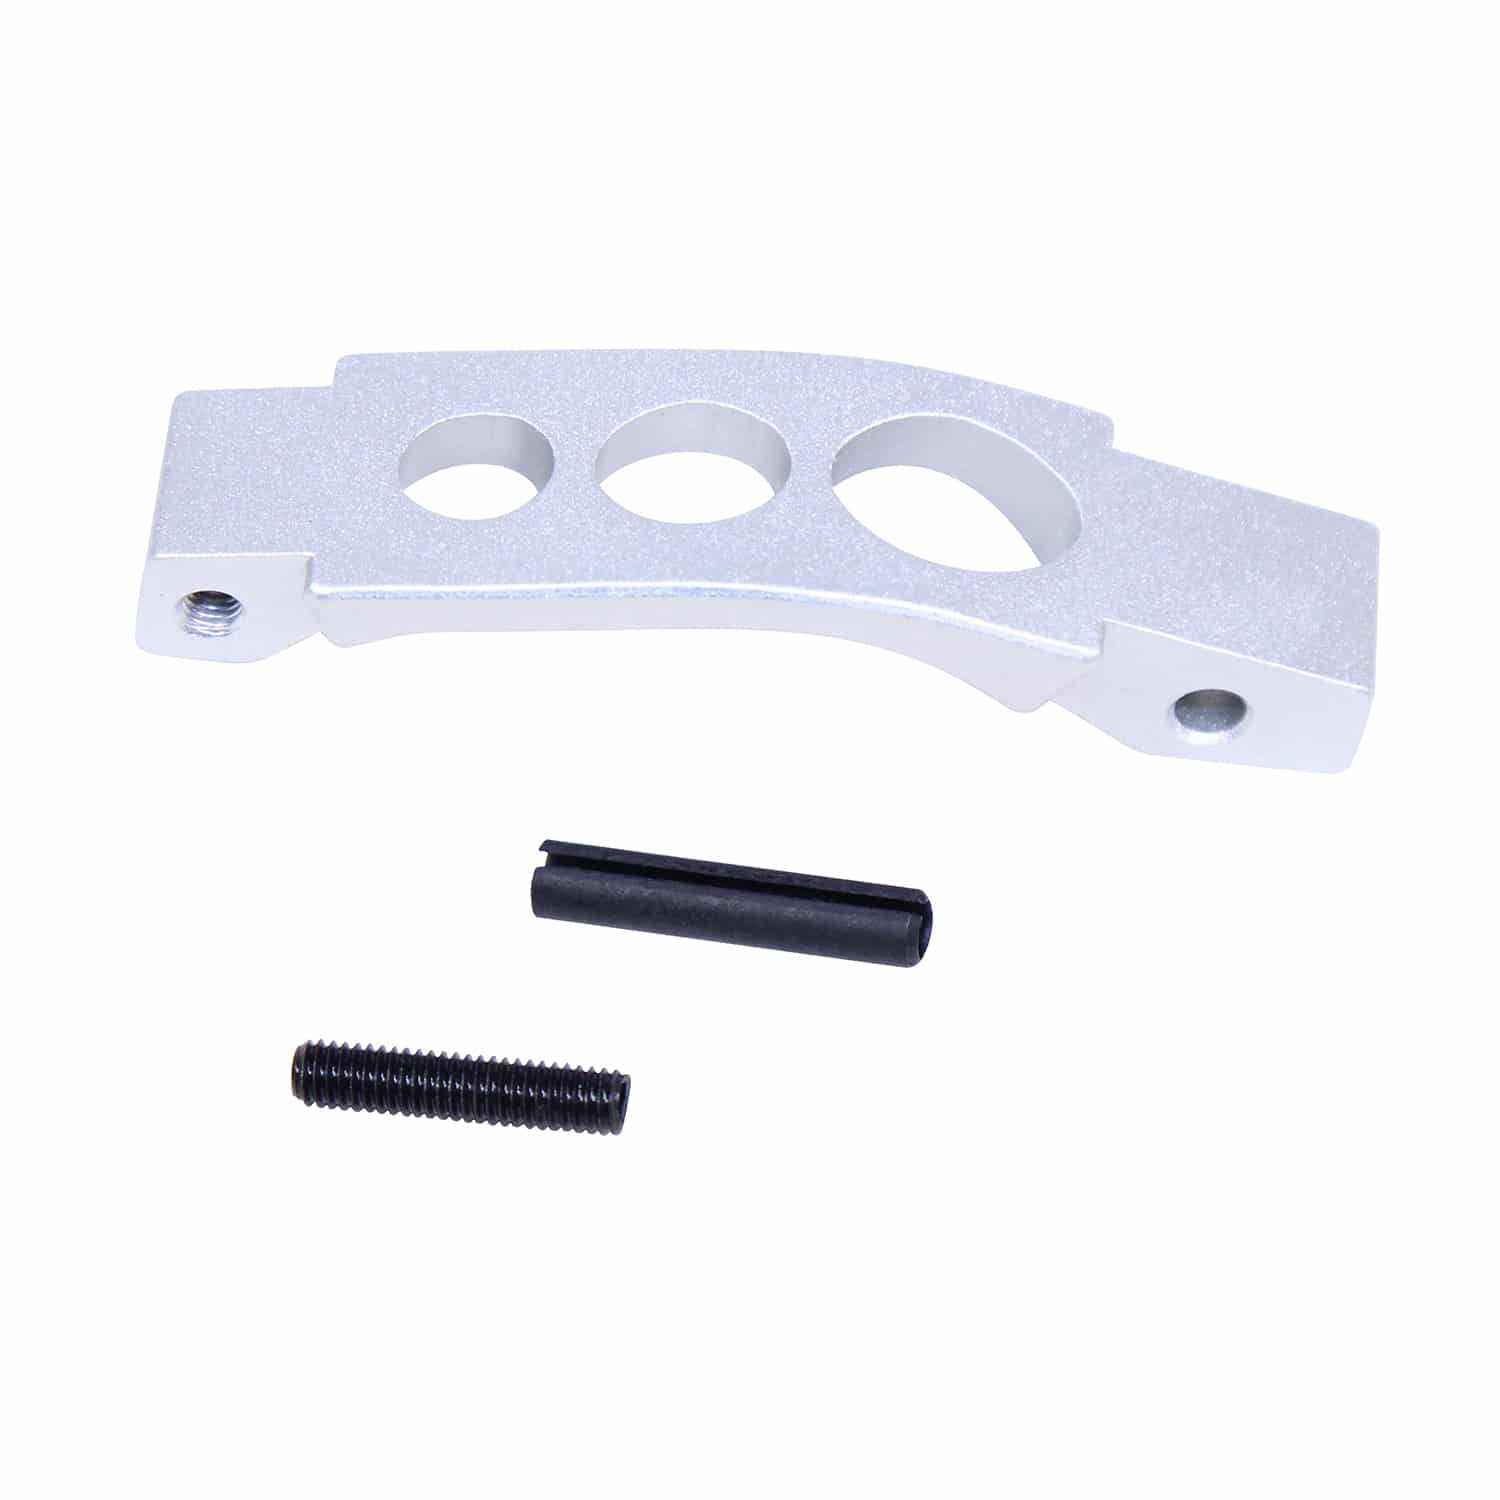 AR-15 Extended Trigger Guard in Anodized Clear Aluminum